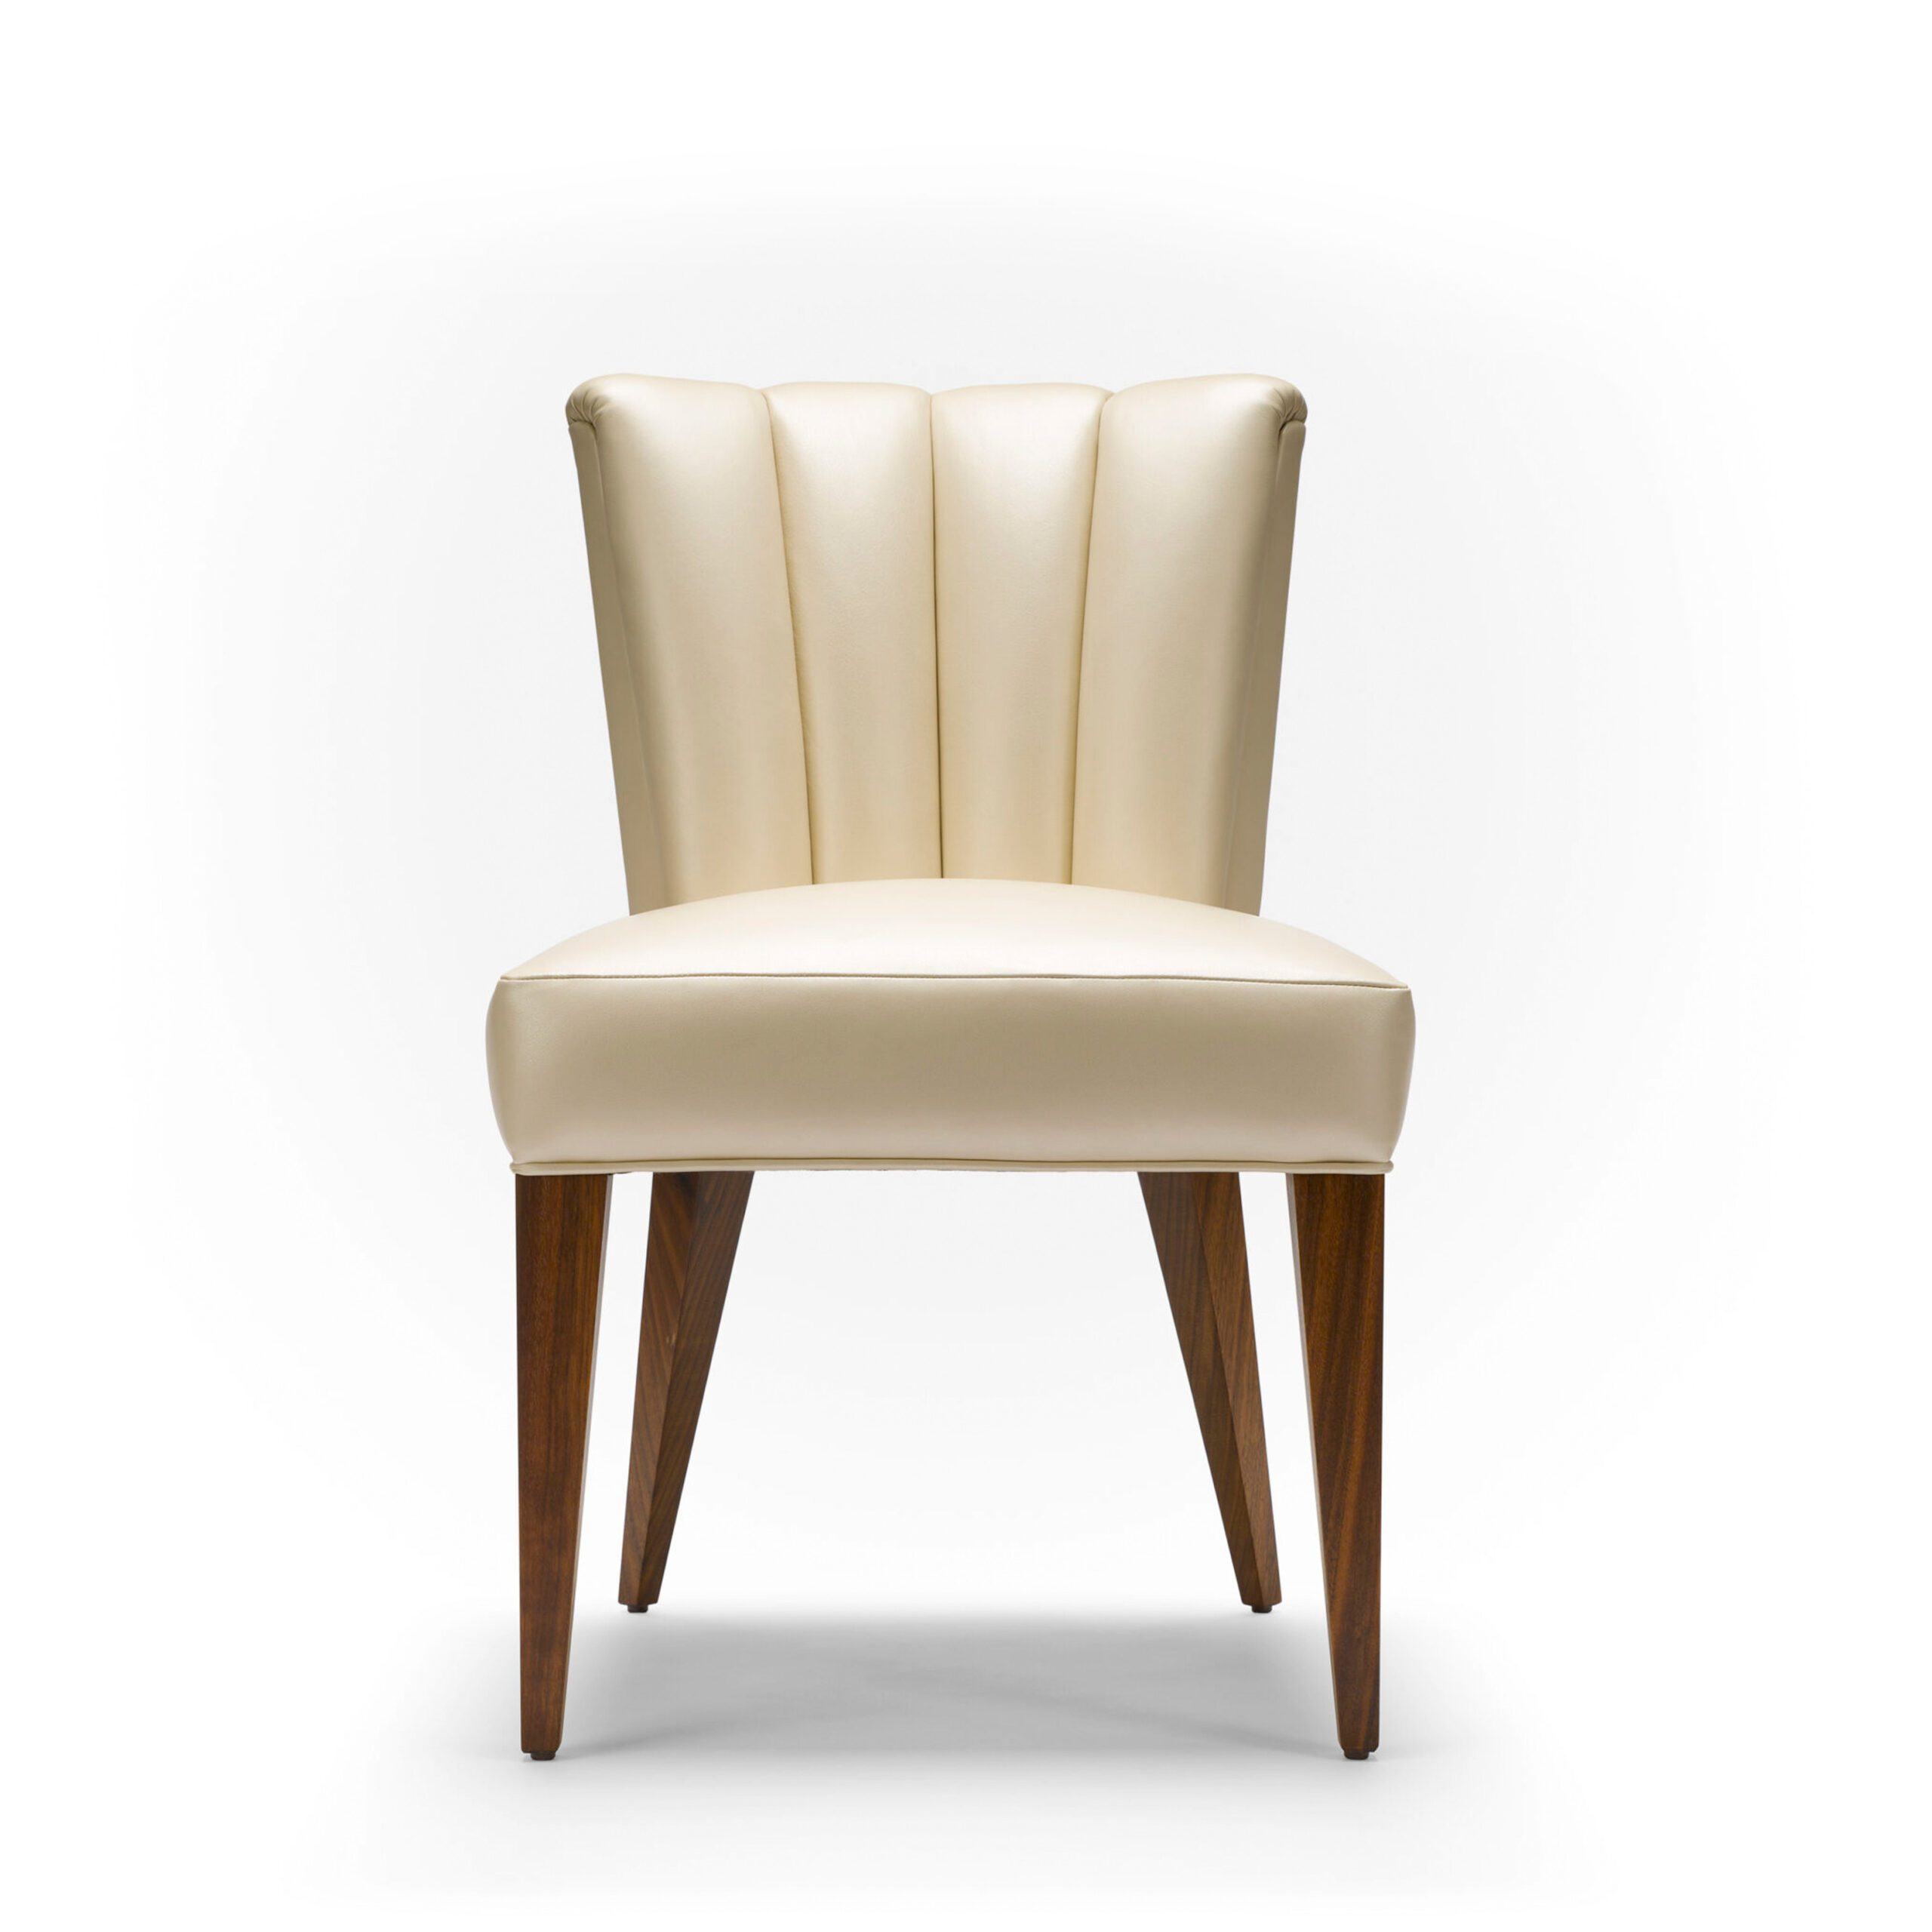 The Elodie Dining Chair - Shown here upholstered in half grain pearlised leather, with natural oiled walnut legs.